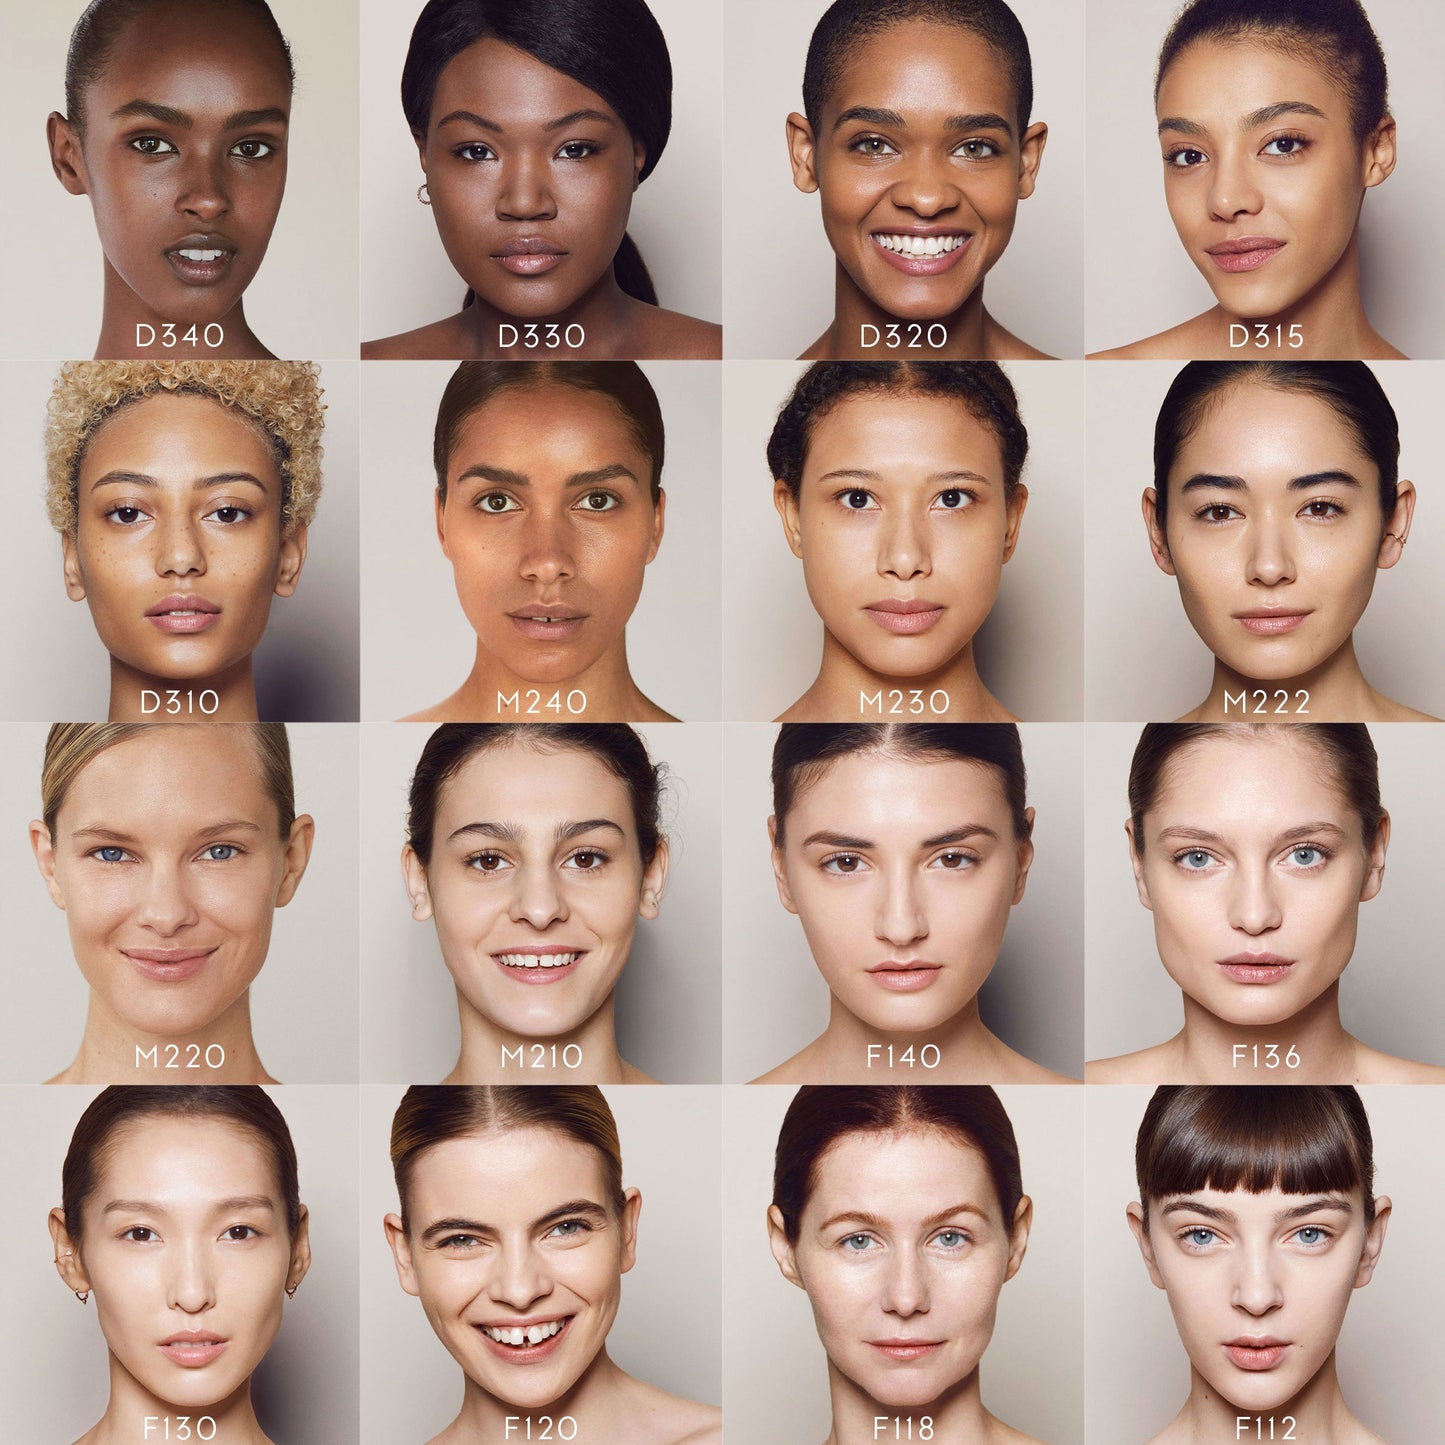 Close ups of various faces of different skin tones, from dark to light with the foundation shades they are wearing. D340 is the deepest shade shown. 